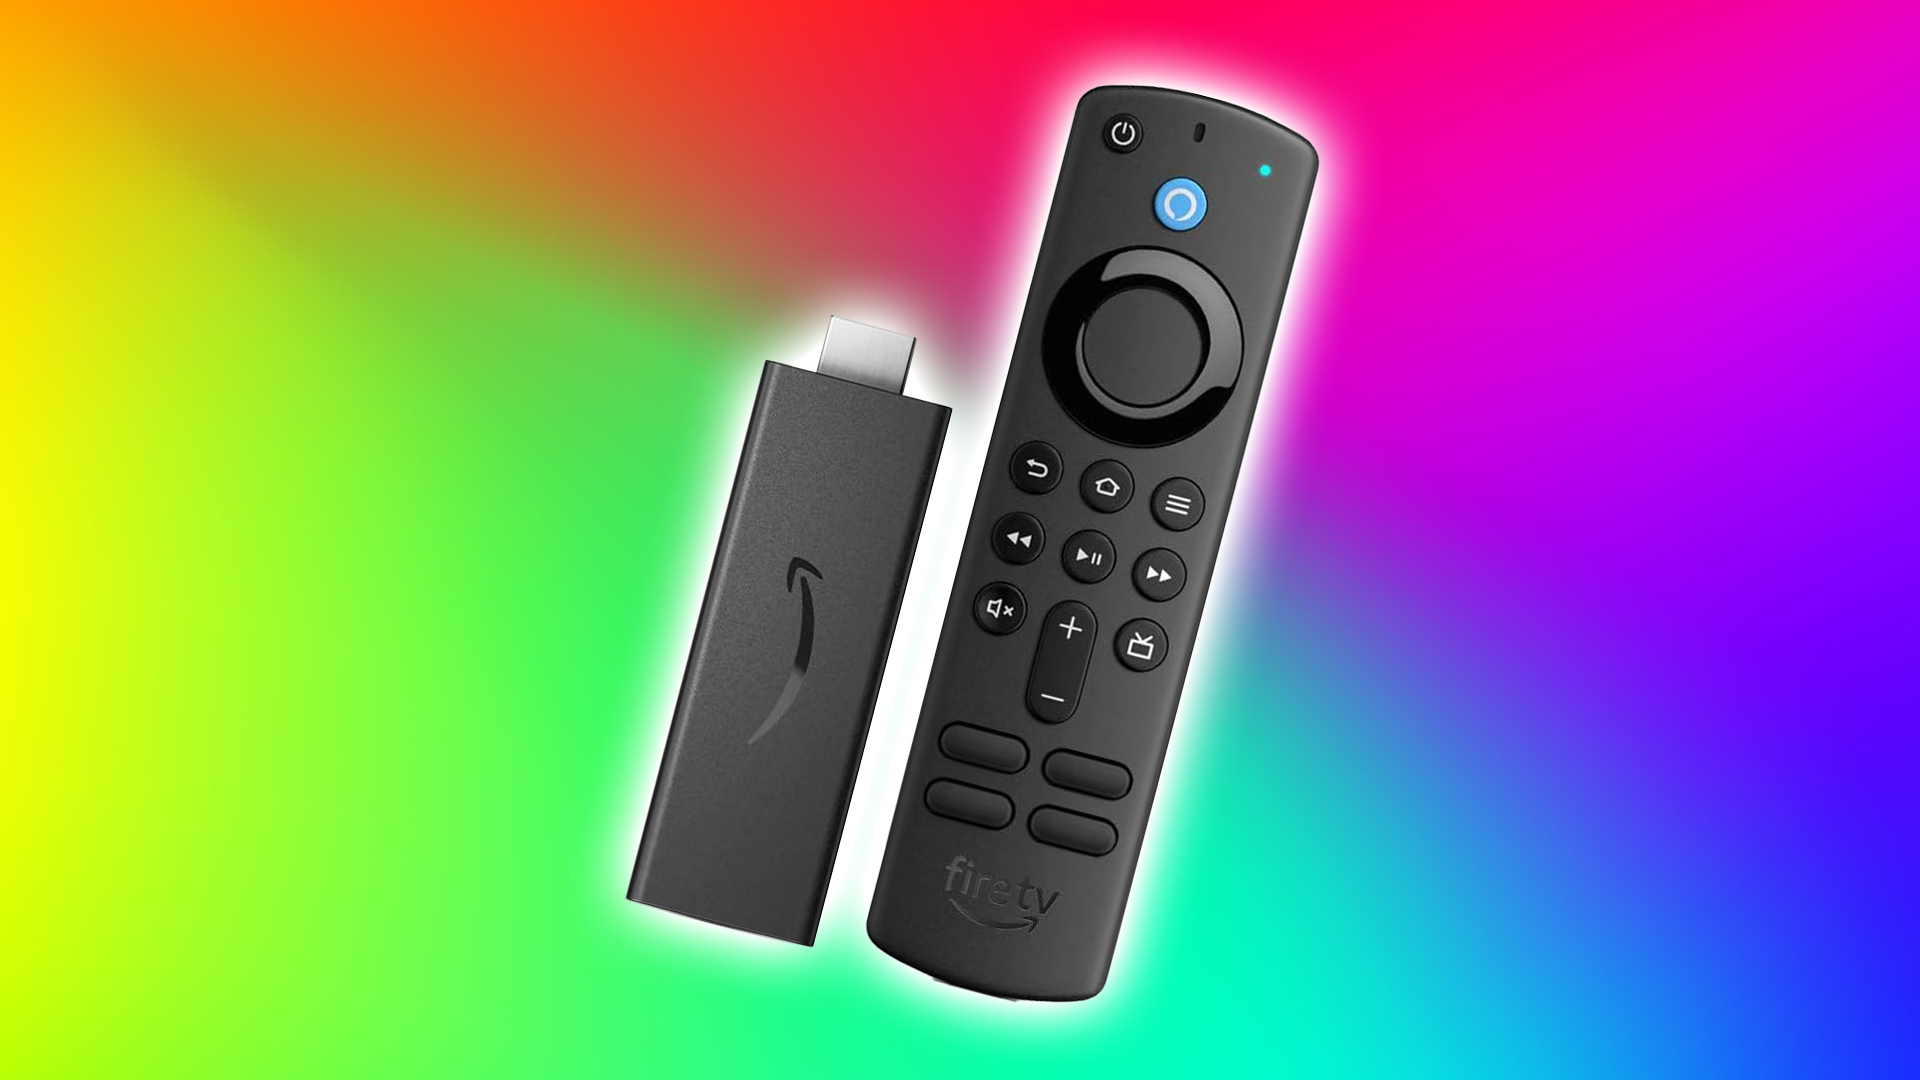 Amazon Fire TV Owners Warn: Controversial Changes Have Turned It Into Hot Garbage, Going Downhill Fast